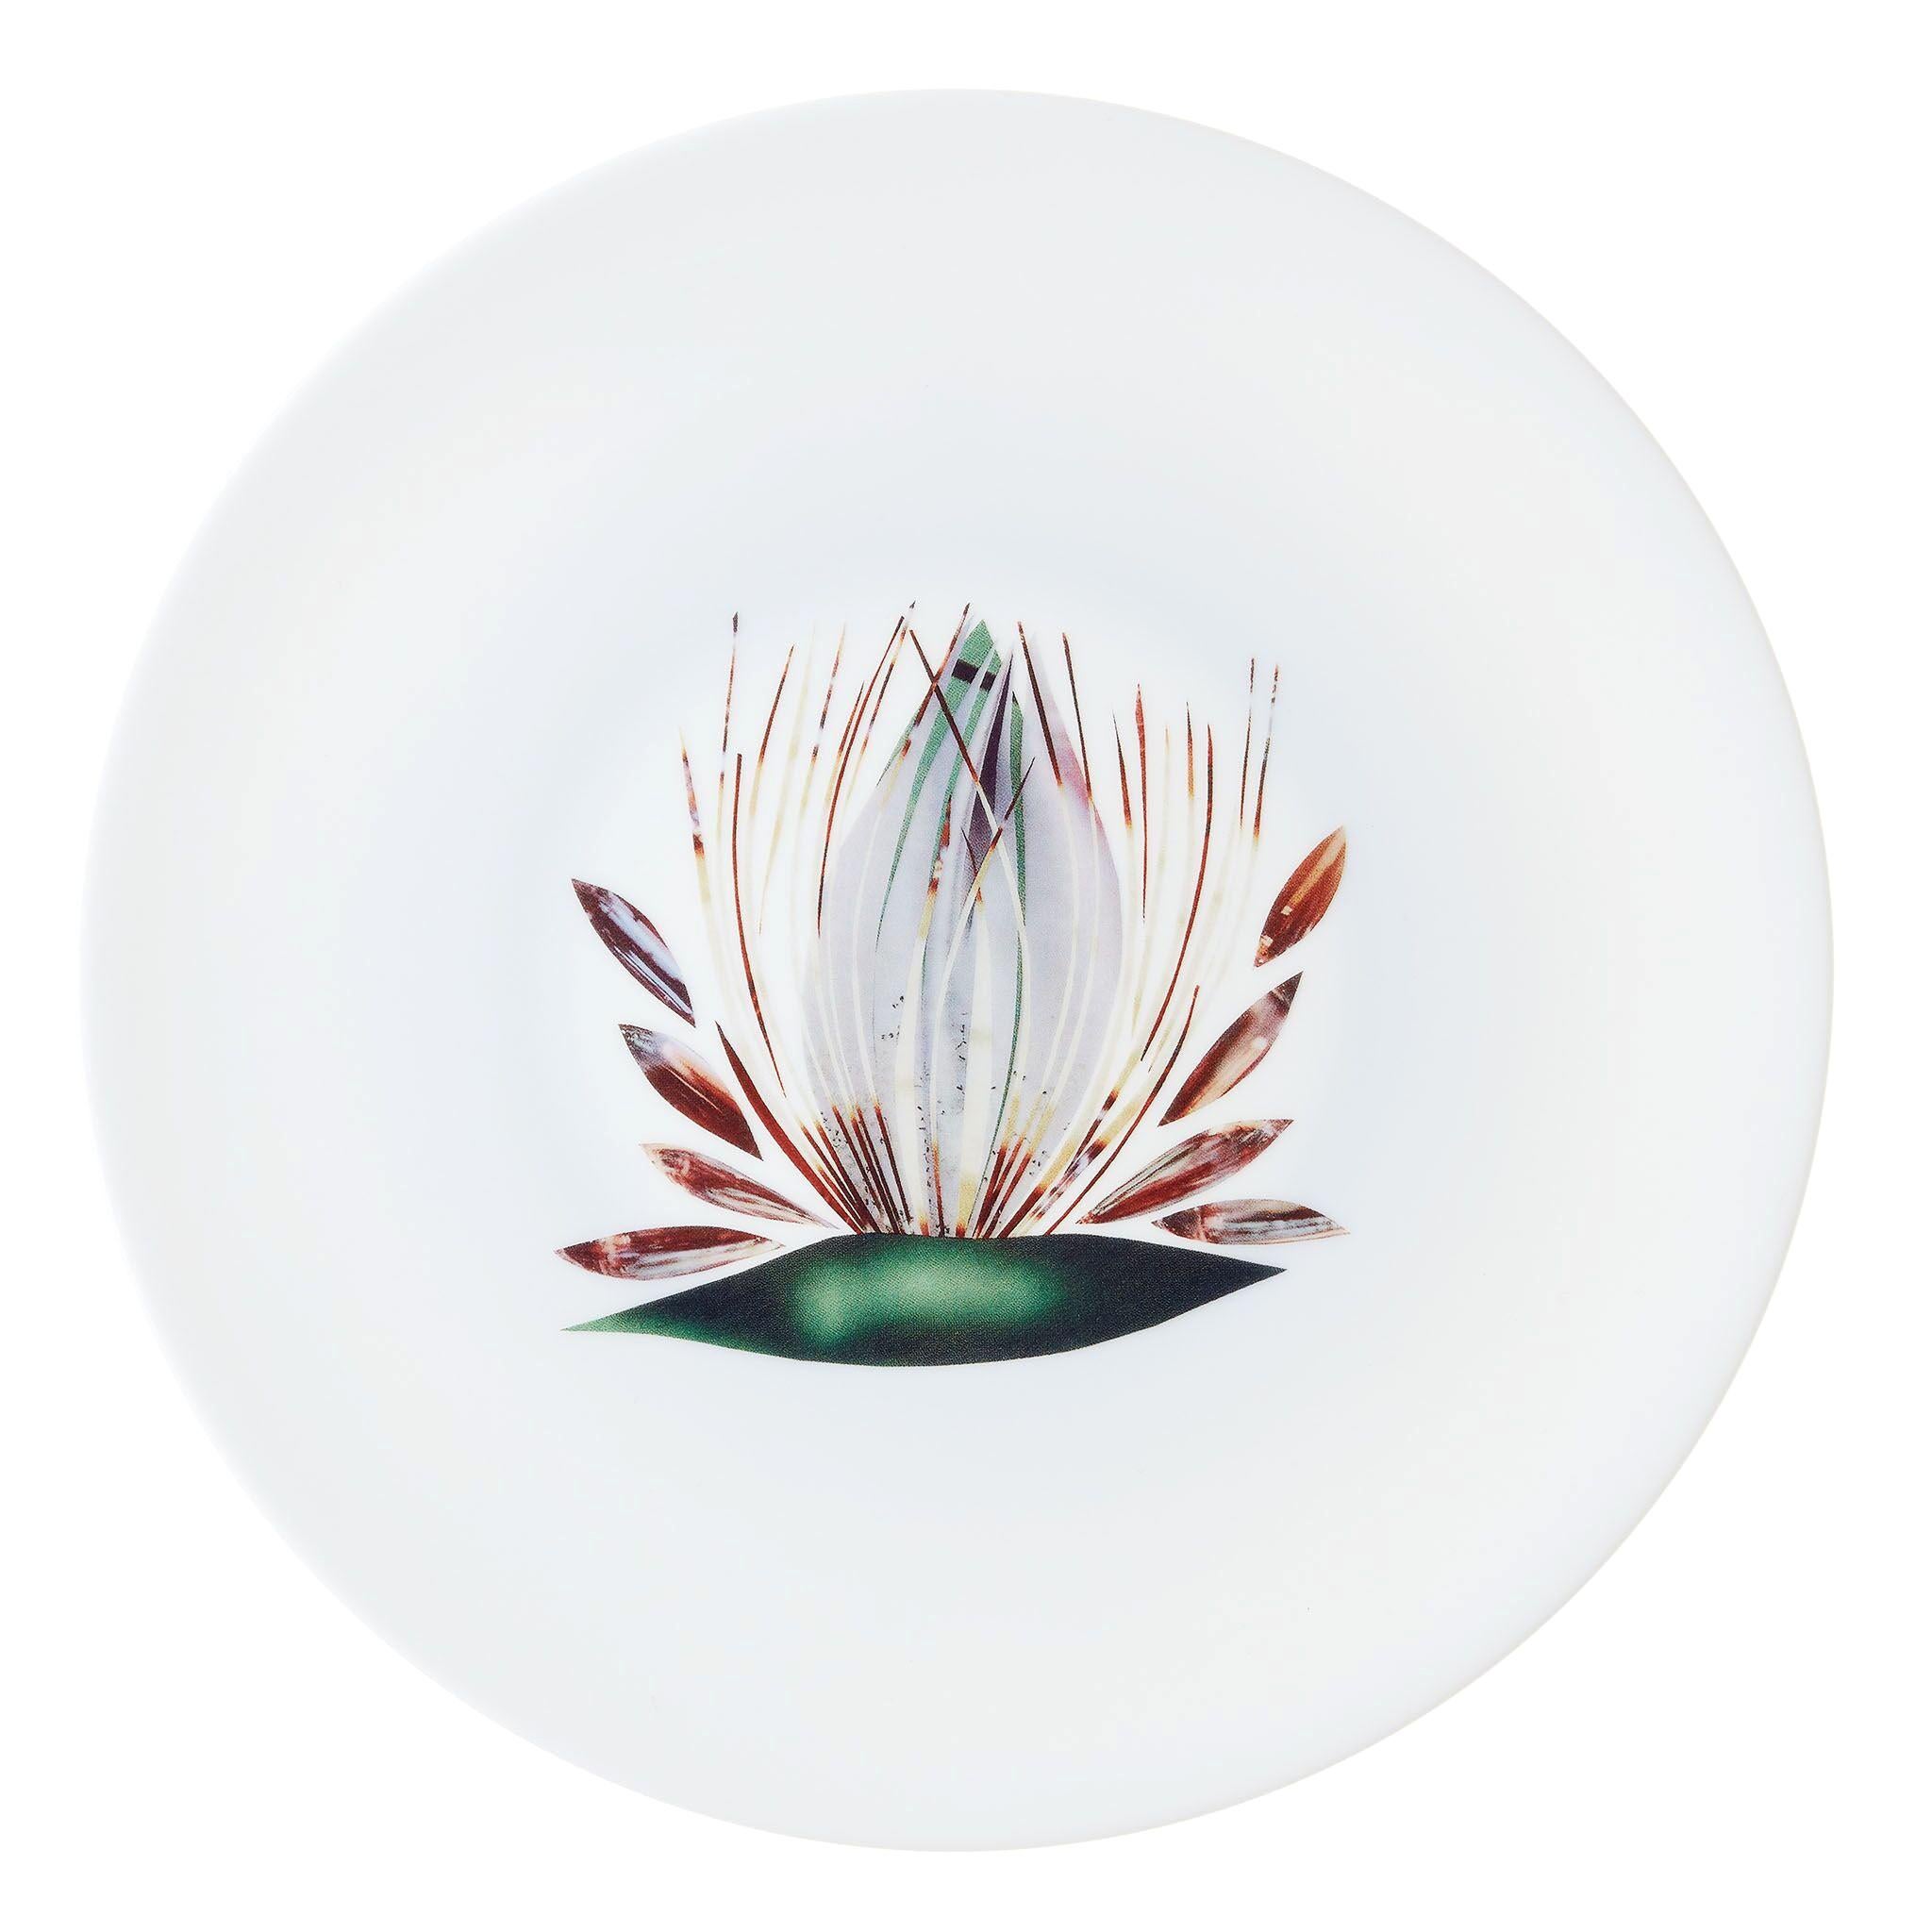 Dinner Porcelain Plate by the French Chef Alain Passard Model " Endive"